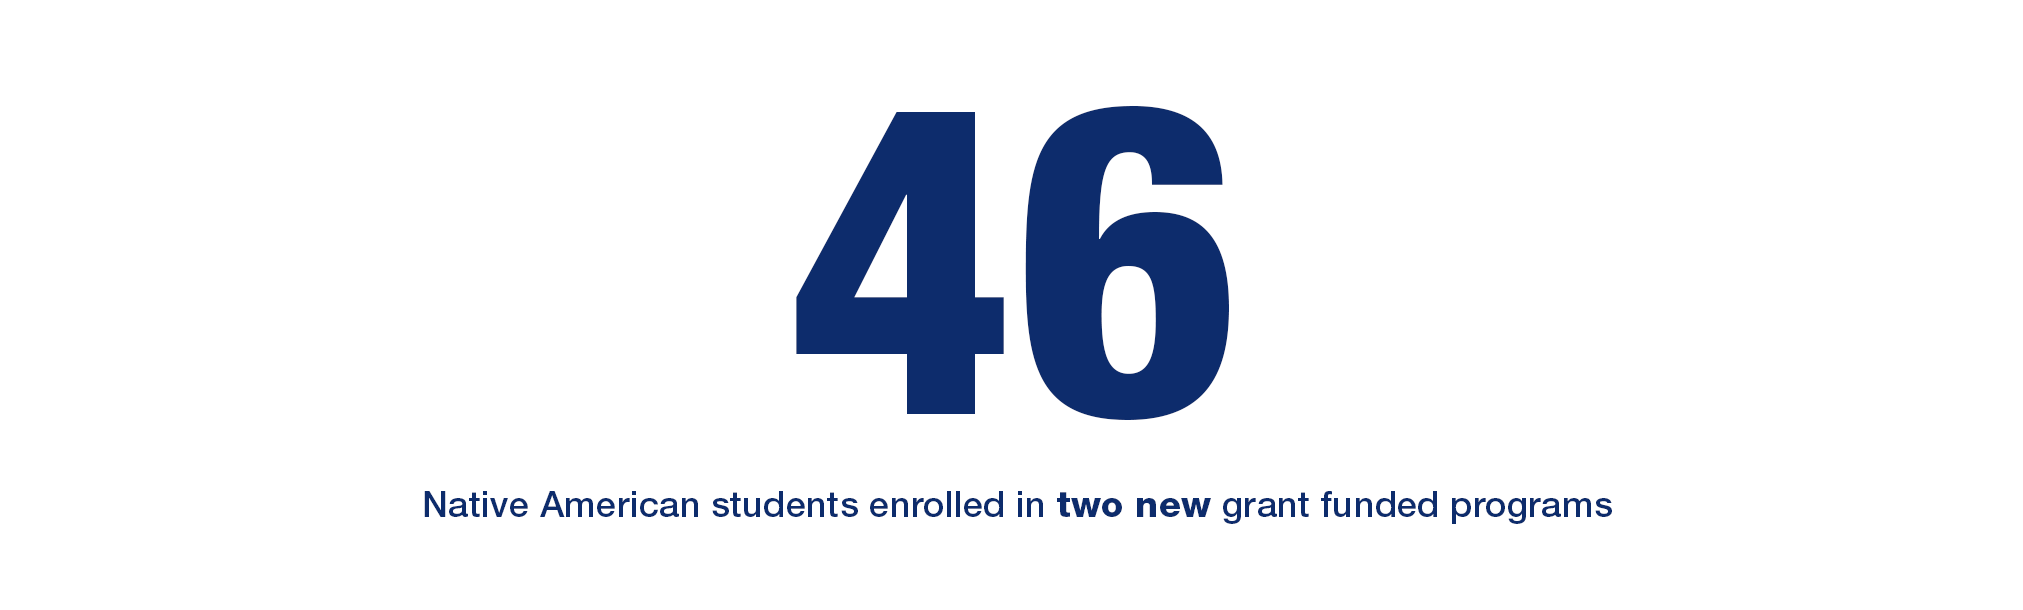 46 native american students are enrolled in two new grant funded programs